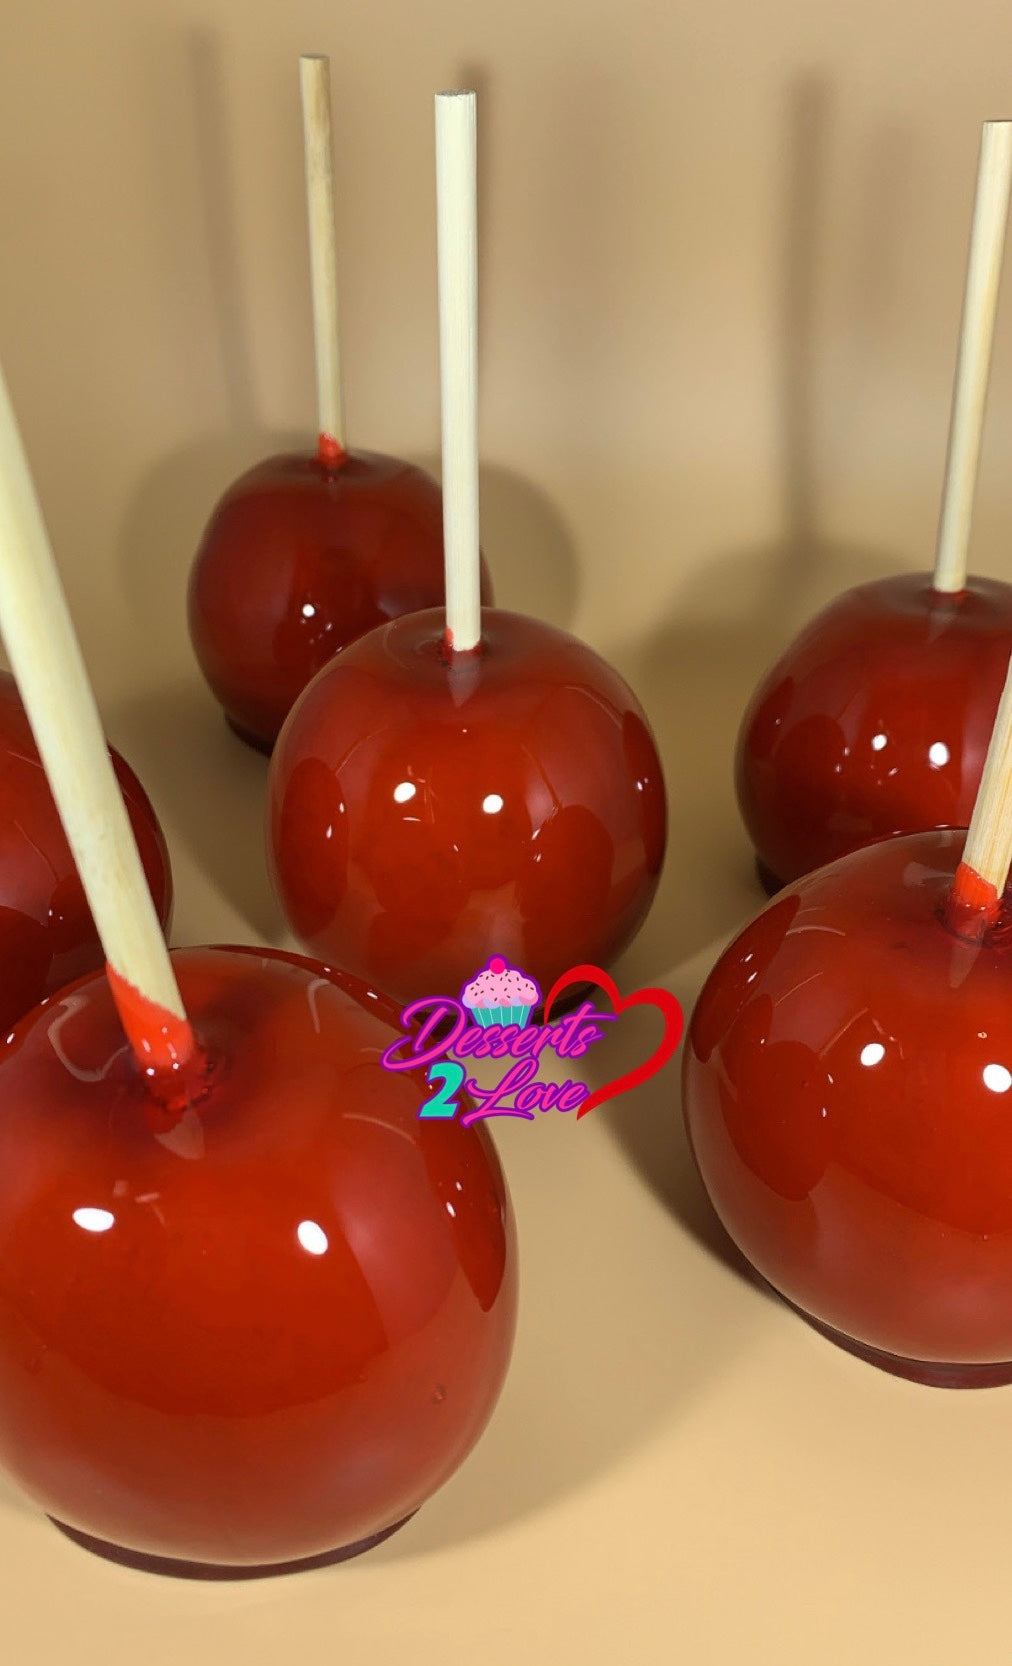 Traditional Red Candy Apples